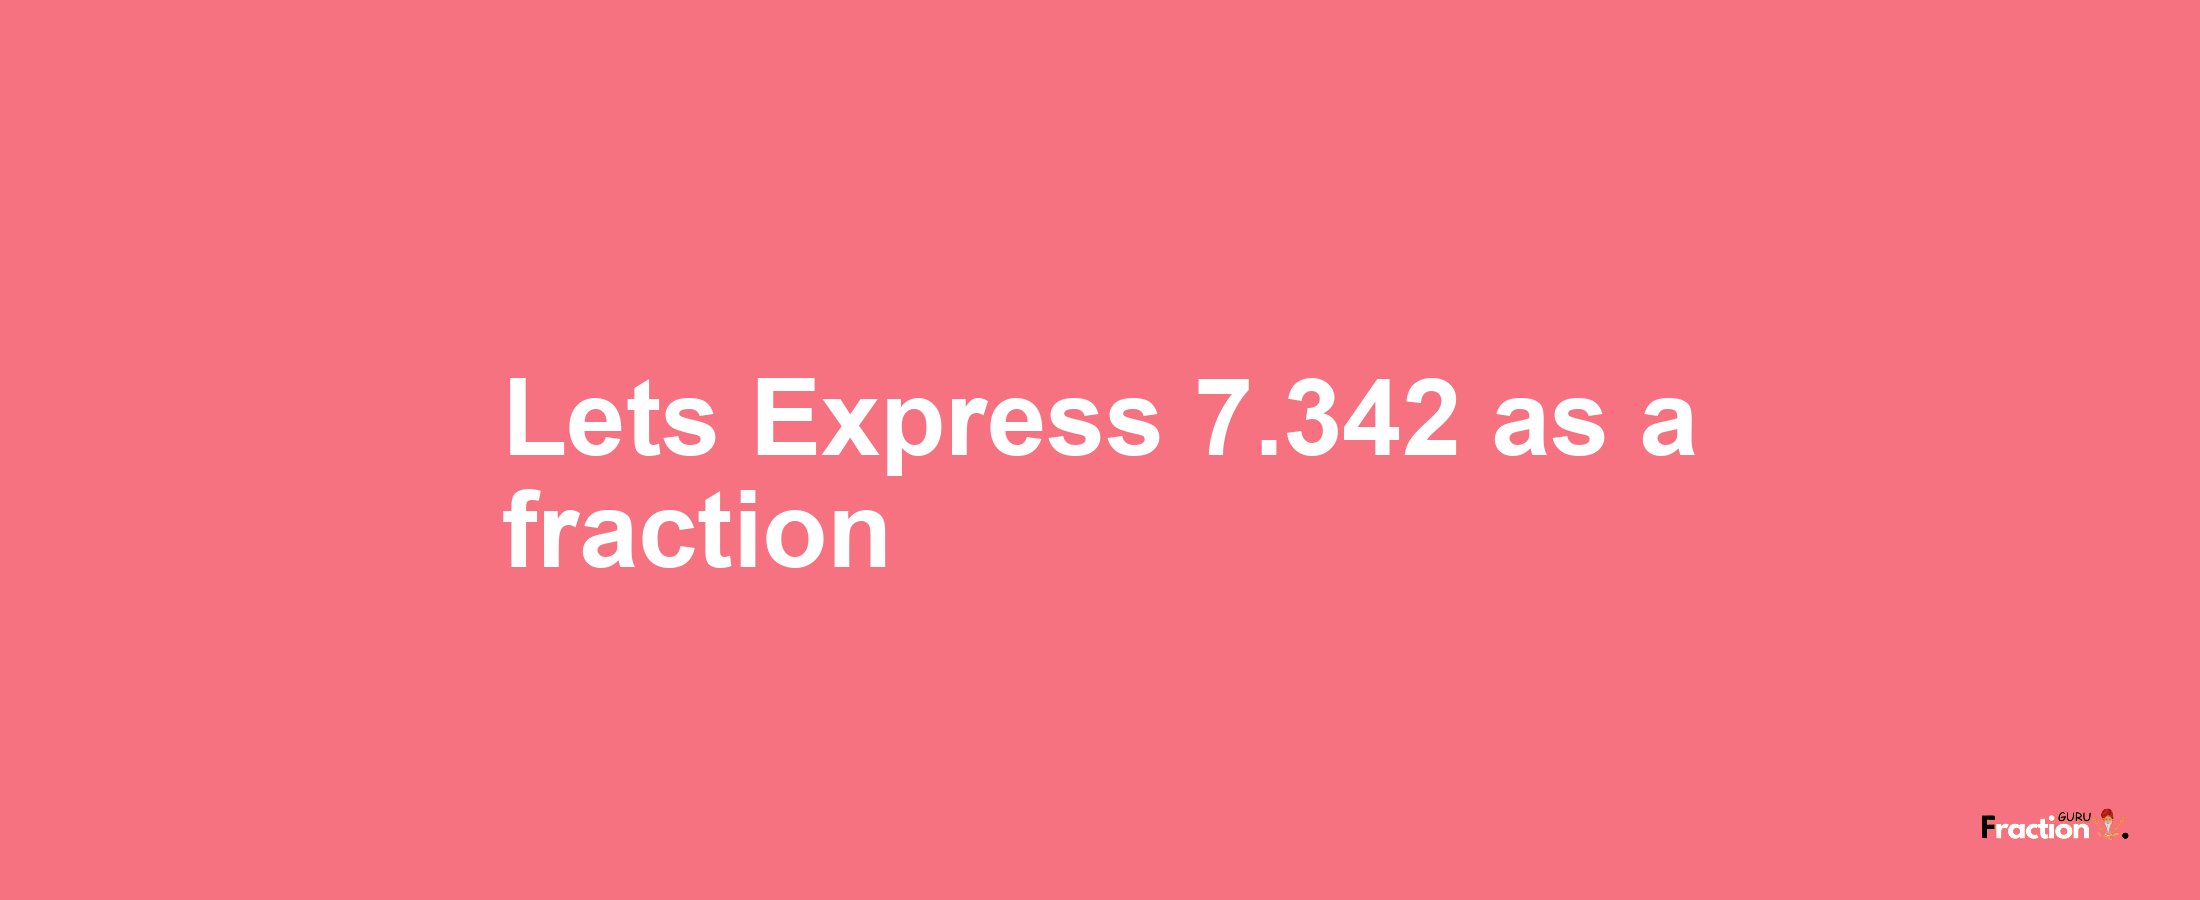 Lets Express 7.342 as afraction